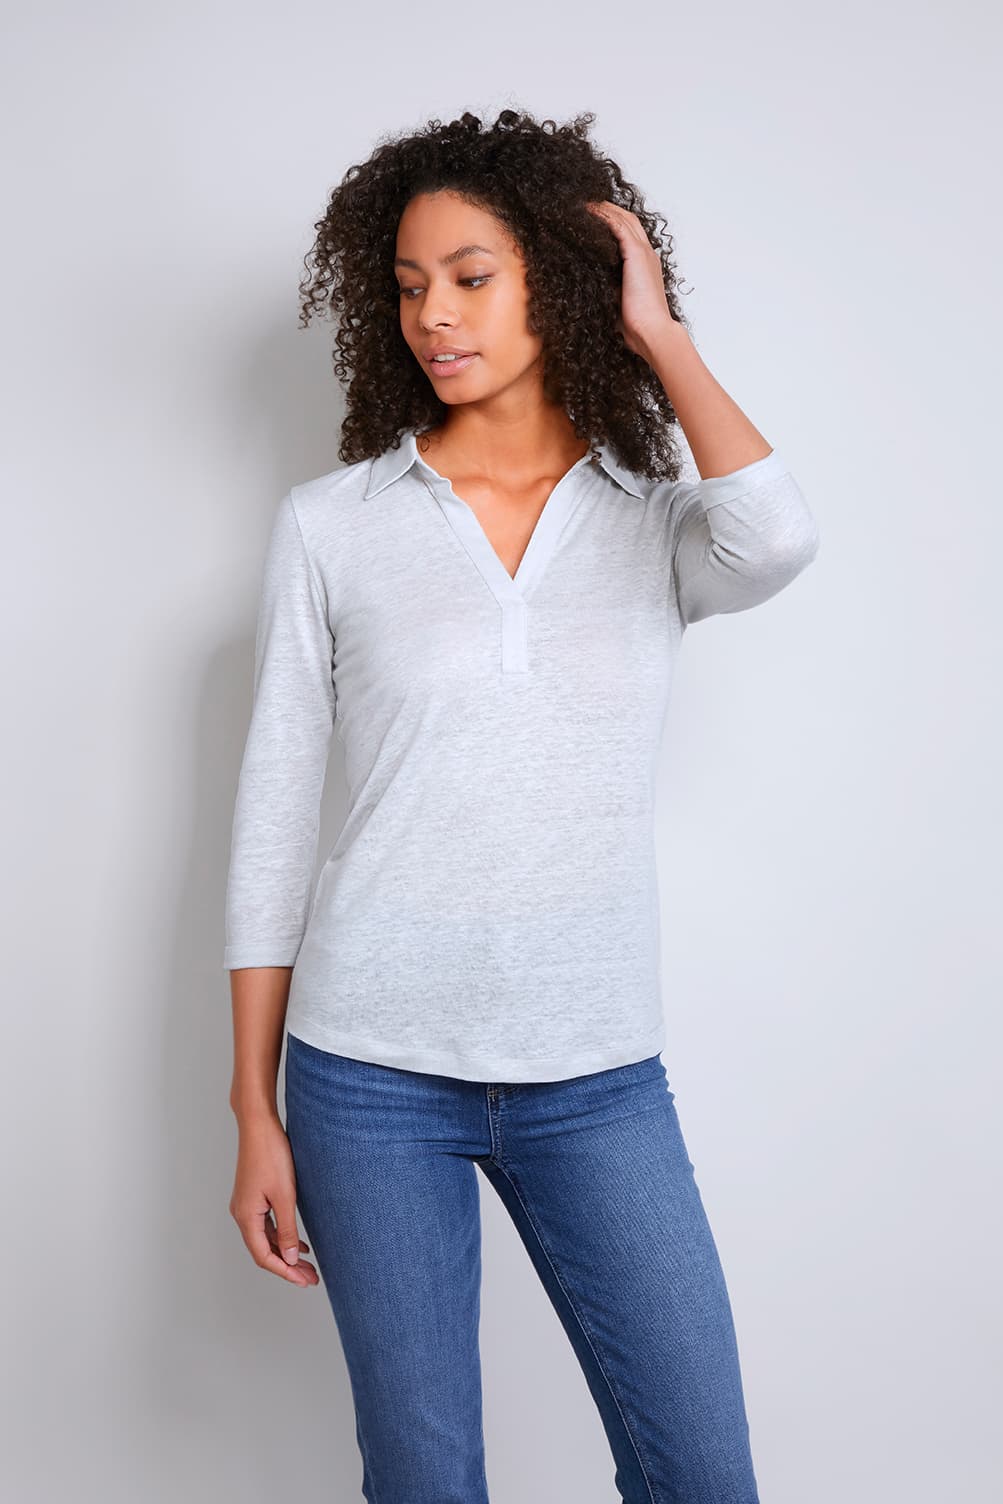 Womens Grey Collared Linen 3/4 sleeve T-shirt by Lavender Hill Clothing